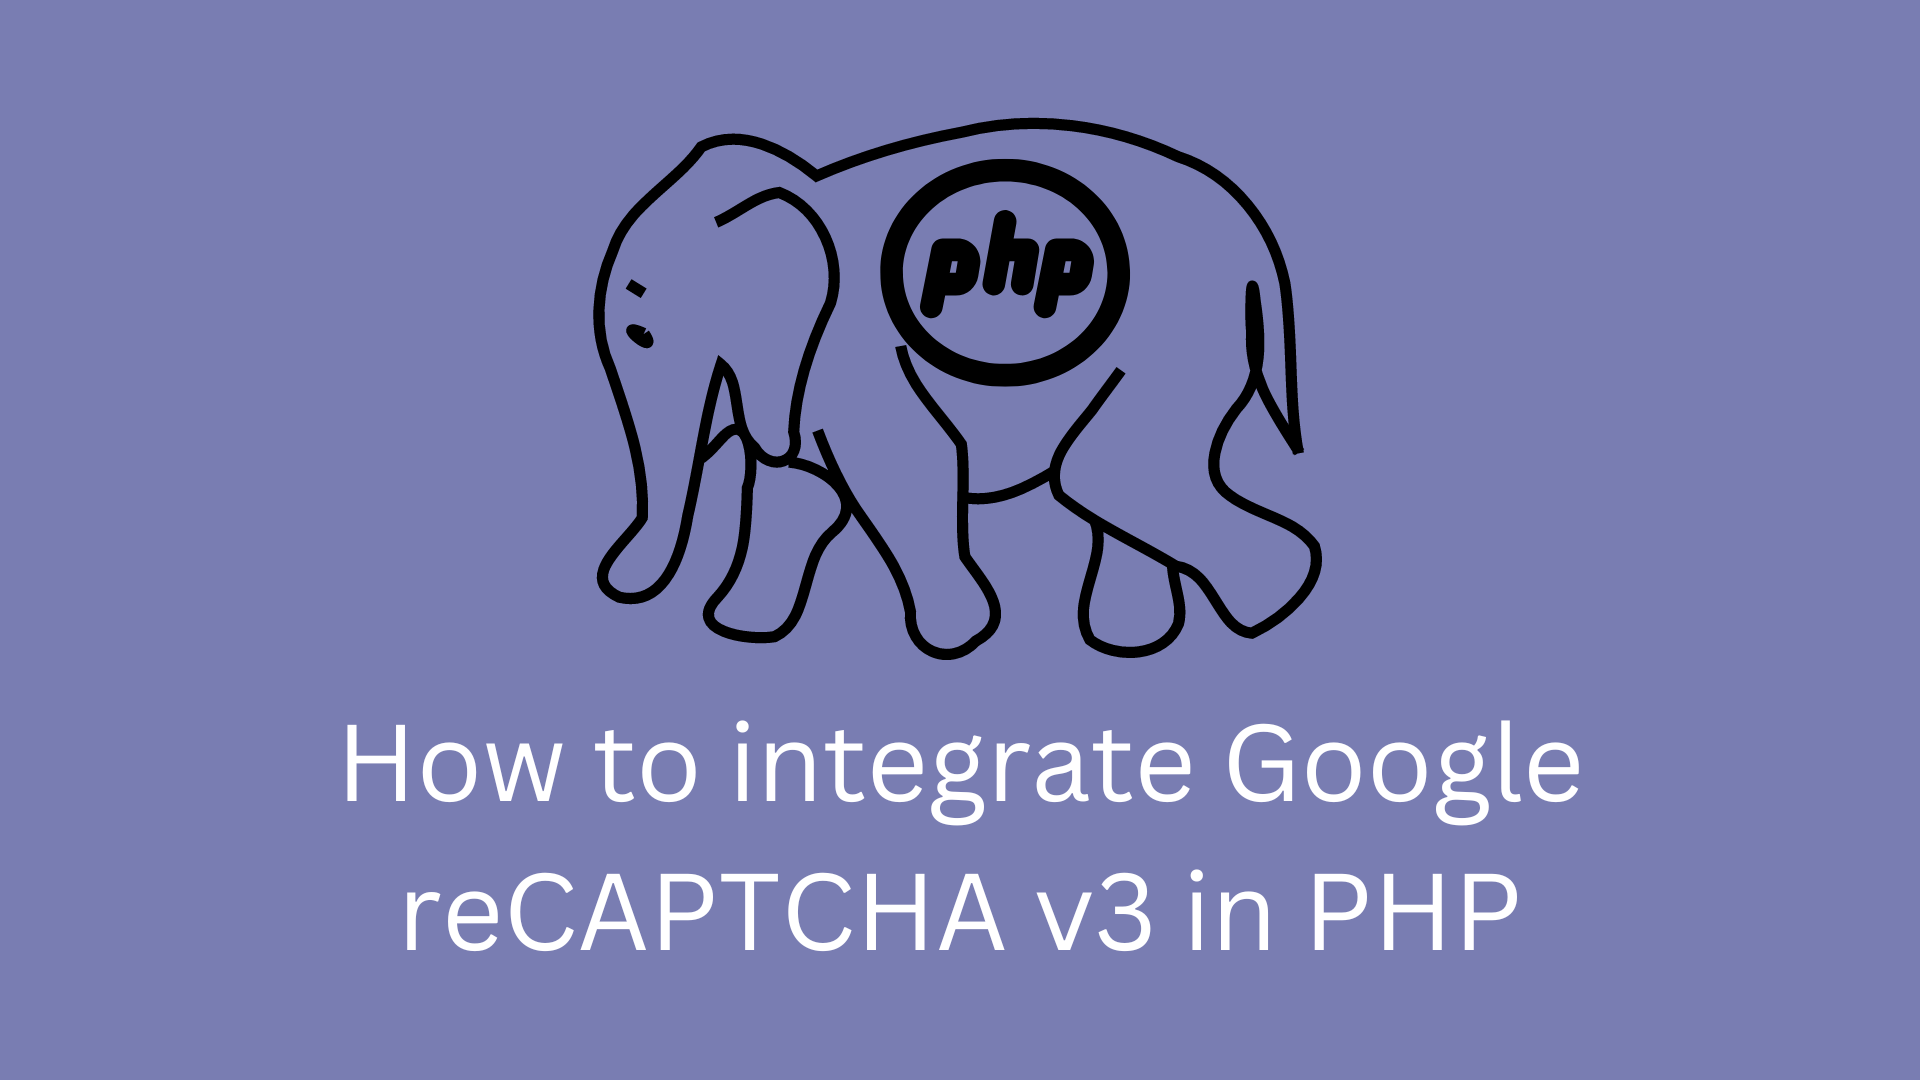 How to integrate Google reCAPTCHA v3 in PHP